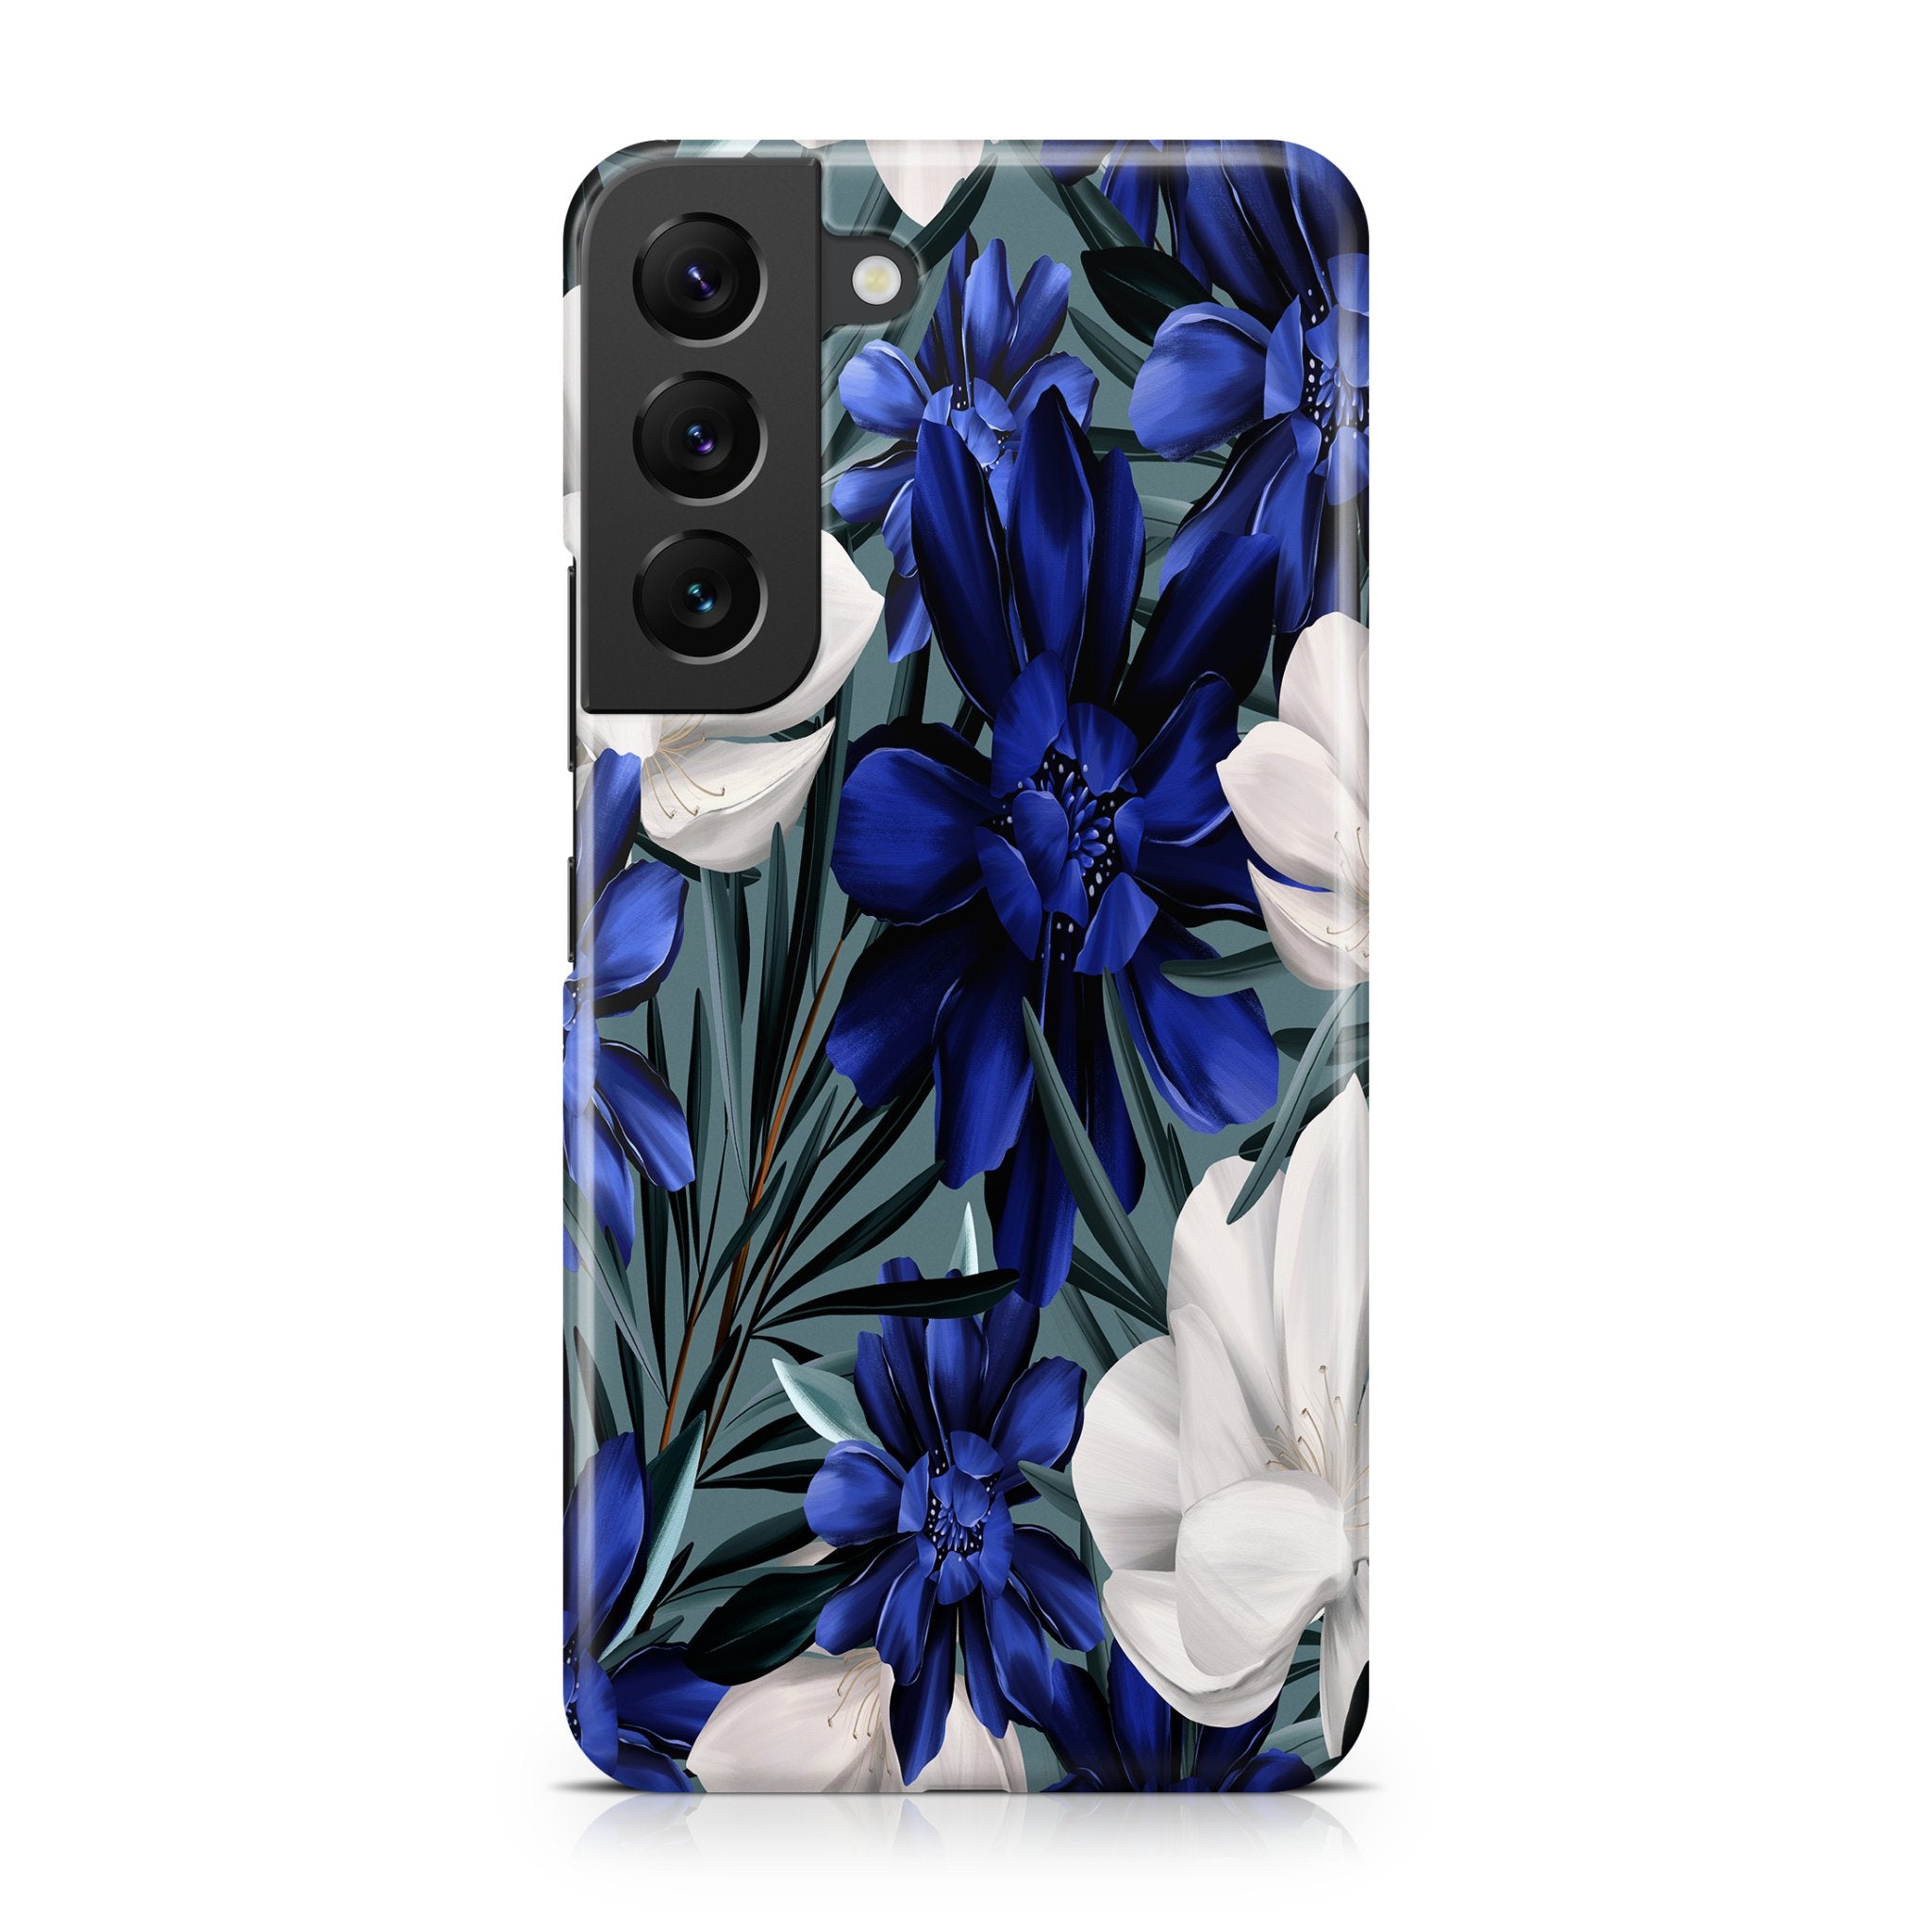 Blue Floral - Samsung phone case designs by CaseSwagger